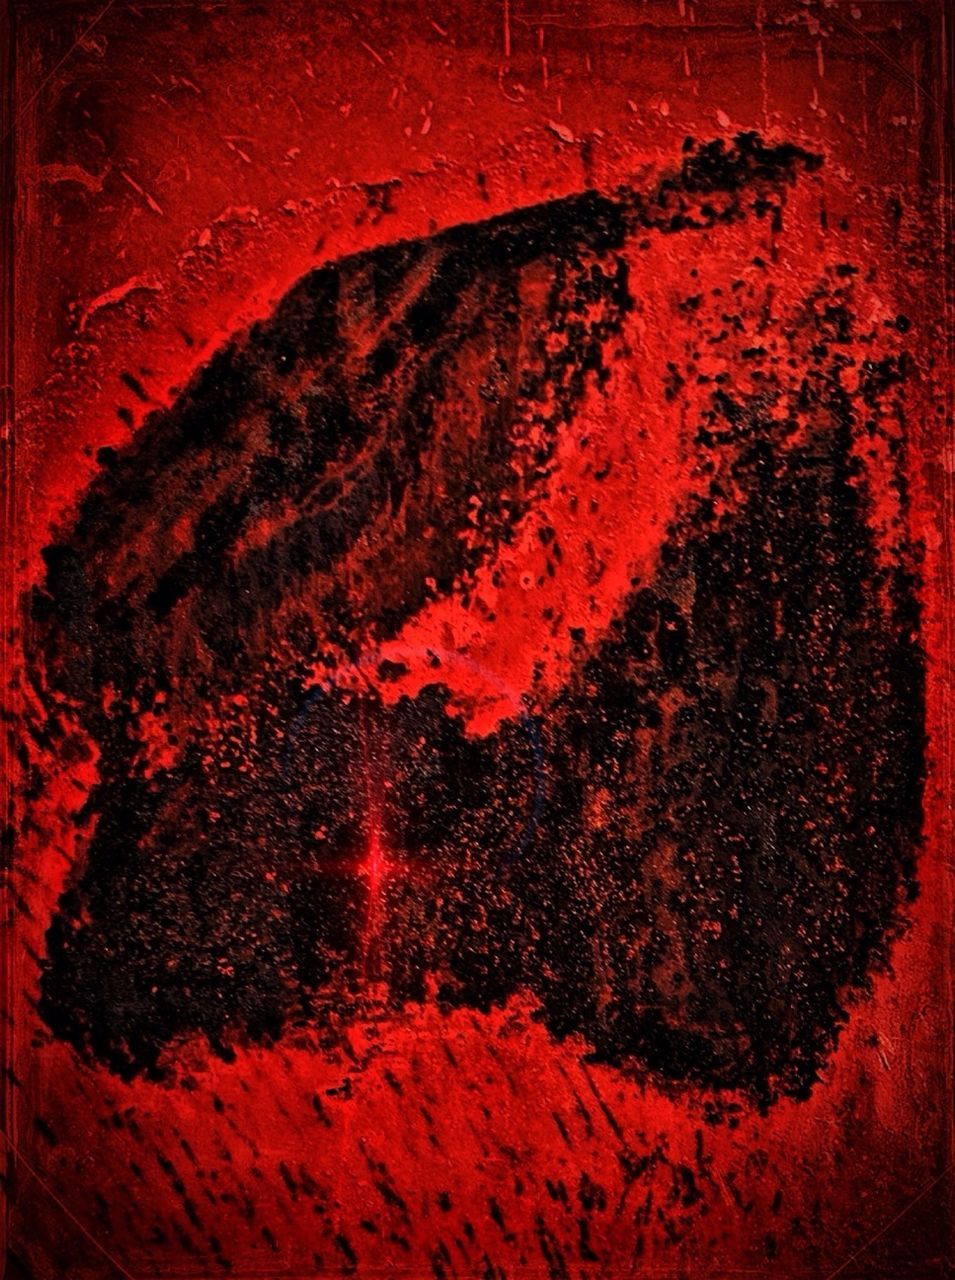 red, full frame, transfer print, auto post production filter, textured, close-up, backgrounds, wall - building feature, paint, weathered, indoors, wall, old, damaged, no people, heart shape, deterioration, built structure, graffiti, rusty